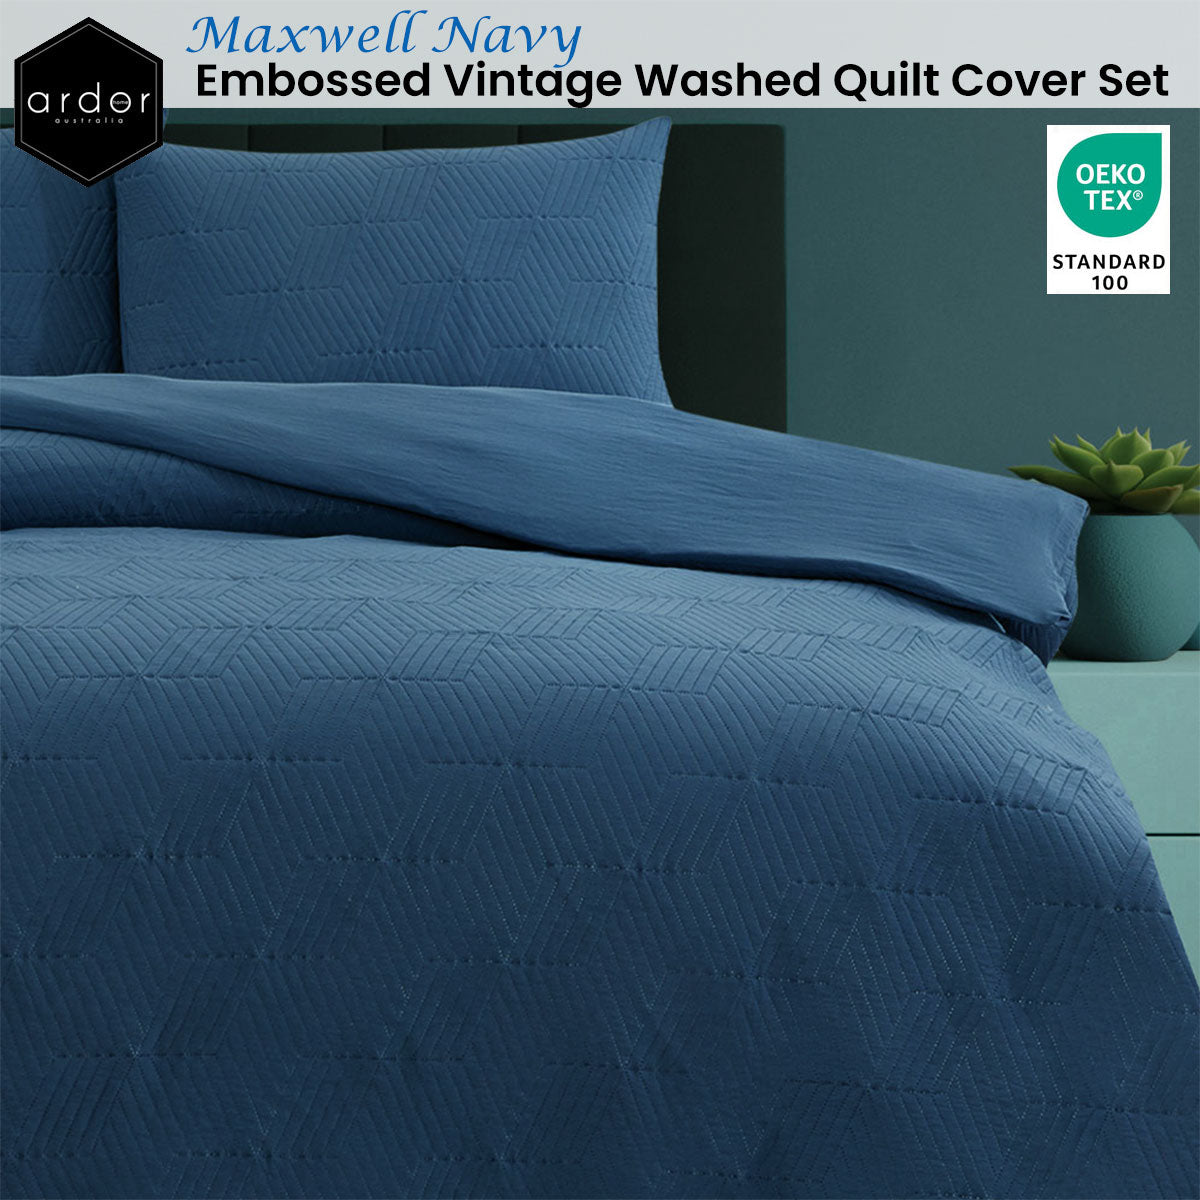 Ardor Maxwell Navy Embossed Vintage Washed Queen Size Quilt Cover Set